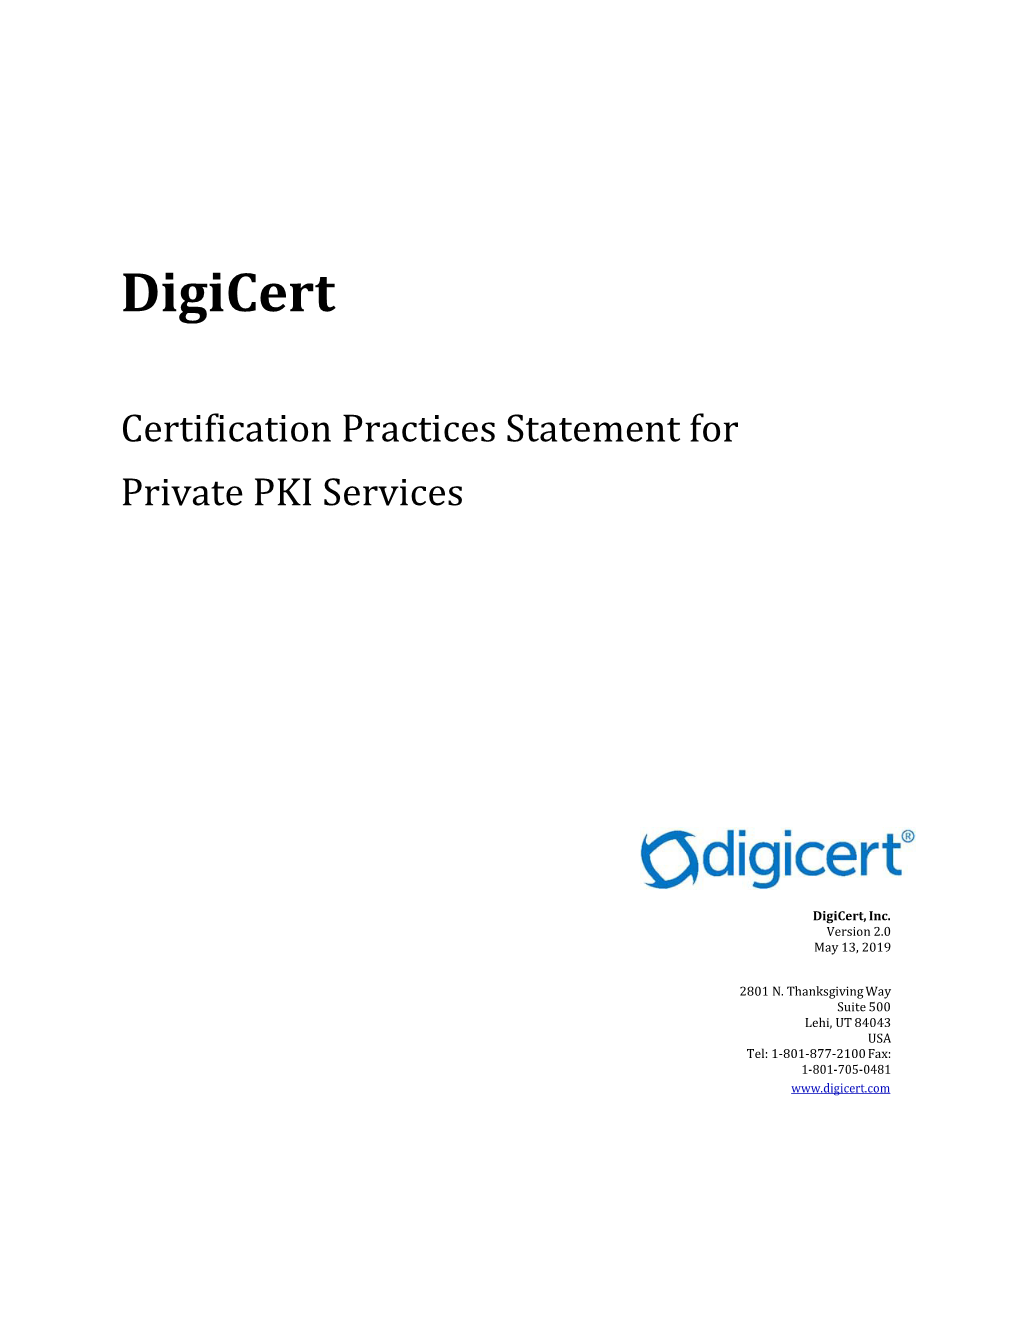 Digicert Certification Practices Statement (CPS) for Private PKI Services